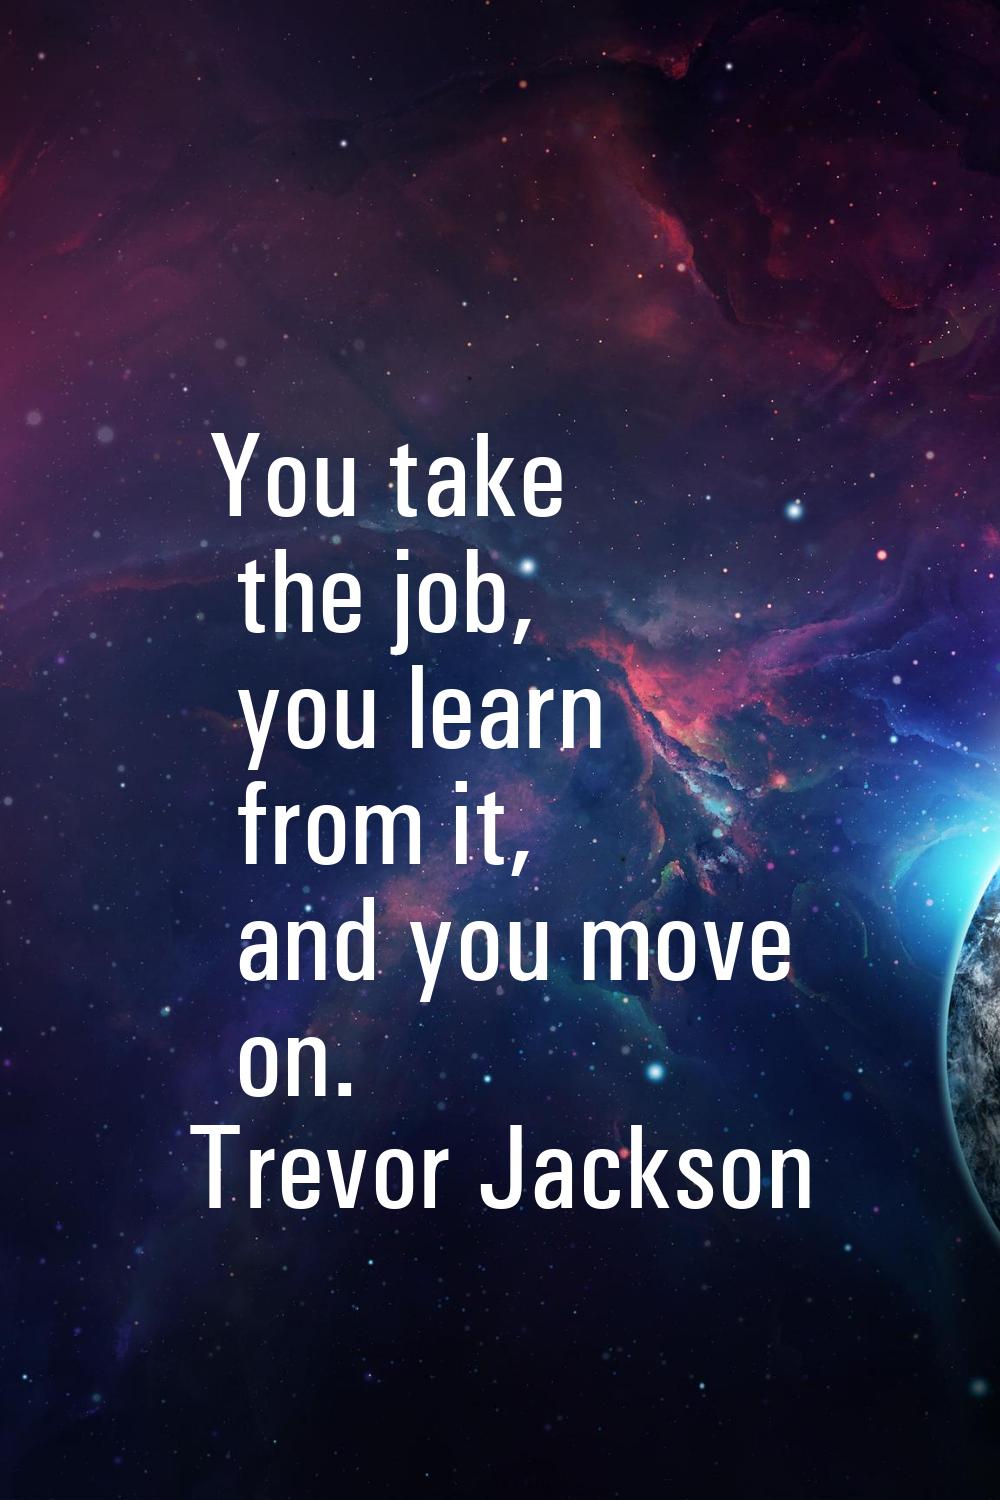 You take the job, you learn from it, and you move on.